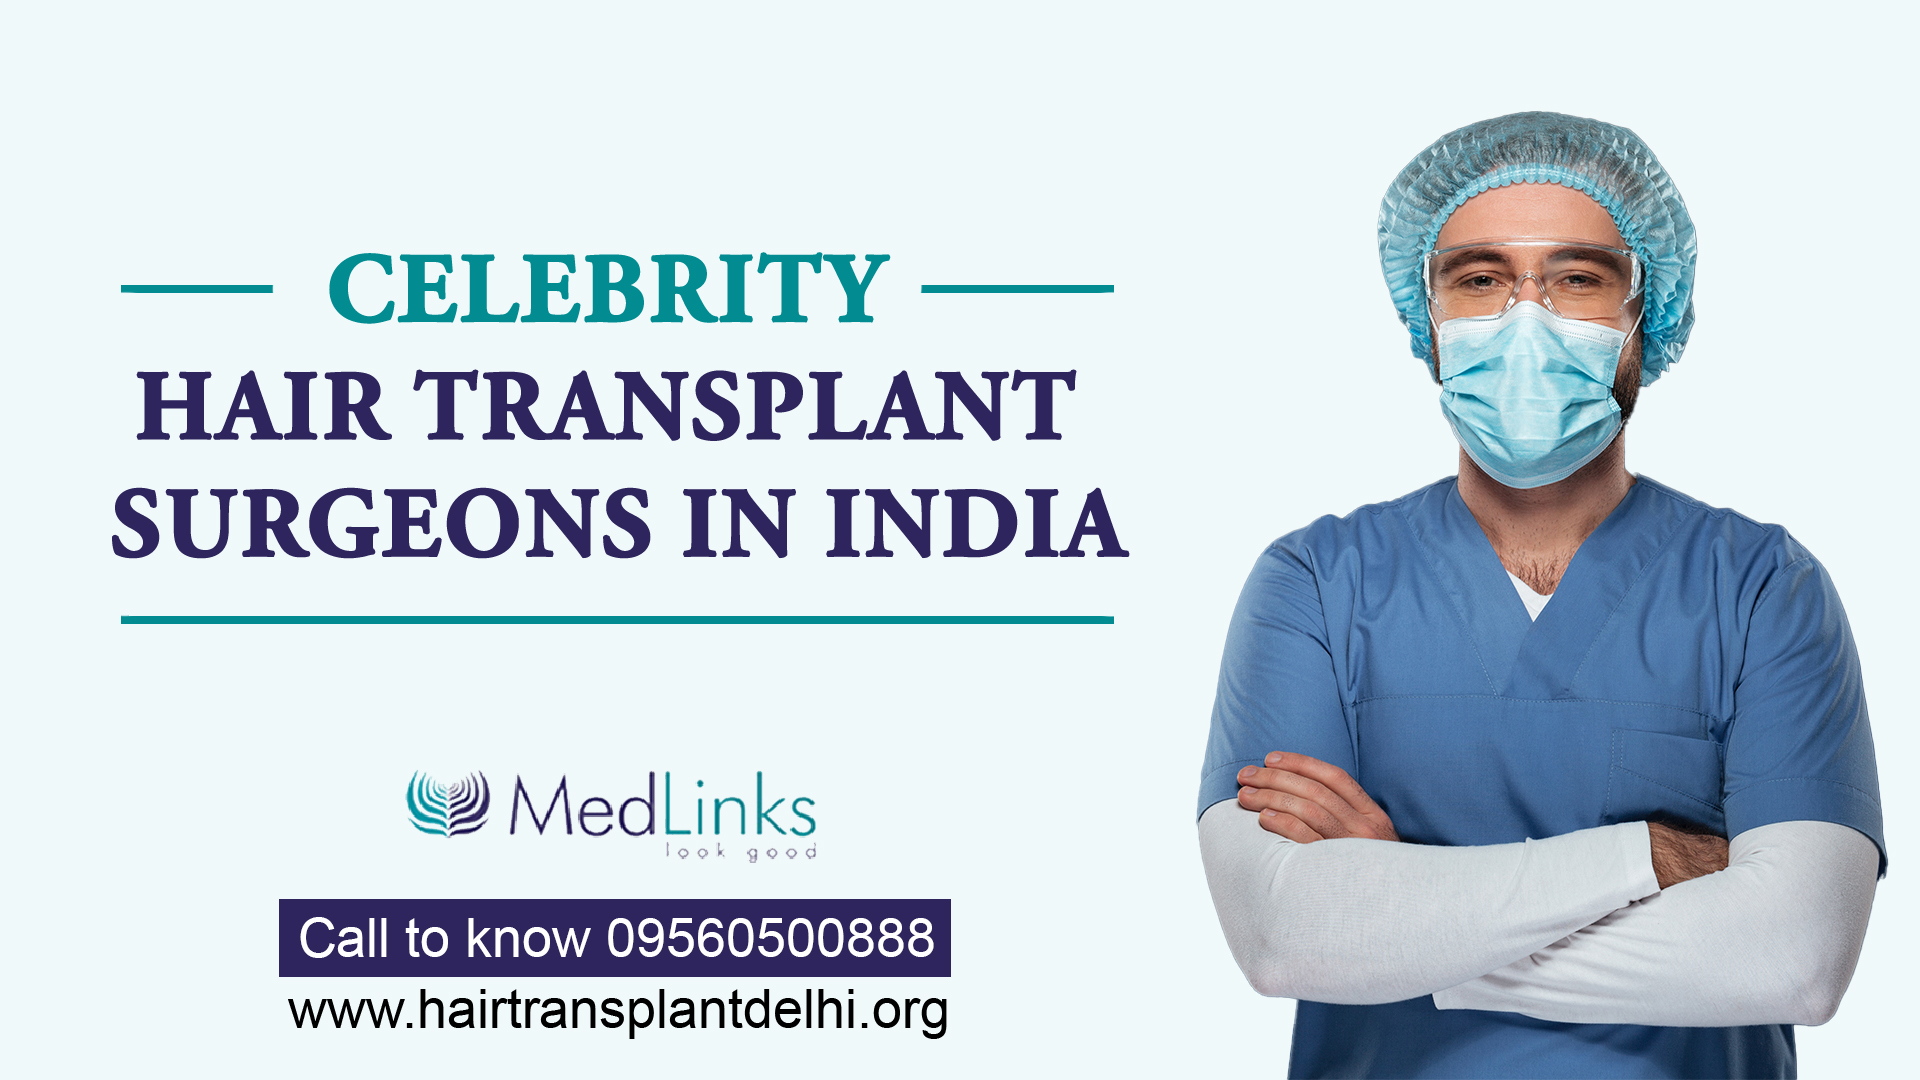 List of Top 5 Celebrity Hair Transplant Surgeons in India